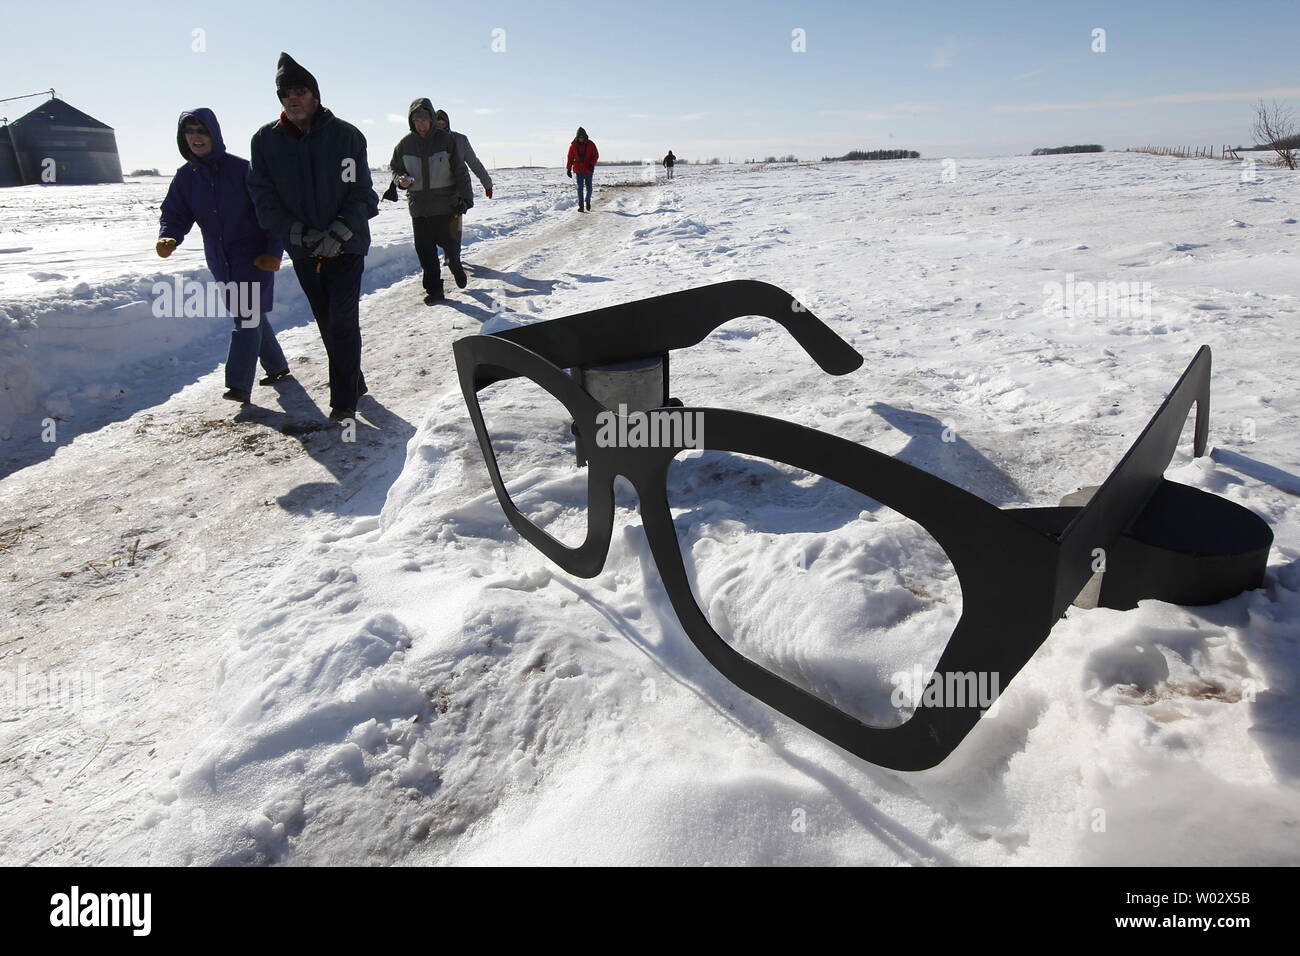 Rock 'n' roll fans walk by a giant pair of Buddy Holly glasses as they visit the site of the plane crash that killed Holly, Ritchie Valens and J. P. 'The Big Bopper' Richardson near Clear Lake, Iowa on February 2, 2009. Singer Don McLean coined the phrase 'the day the music died' in his hit song American Pie referring to the death of the three rock 'n' roll pioneers in the early morning hours of February 3, 1959. Thousands of people descended upon Clear Lake to celebrate the 50th anniversary of 'the day the music died'.   UPI/Brian Kersey Stock Photo